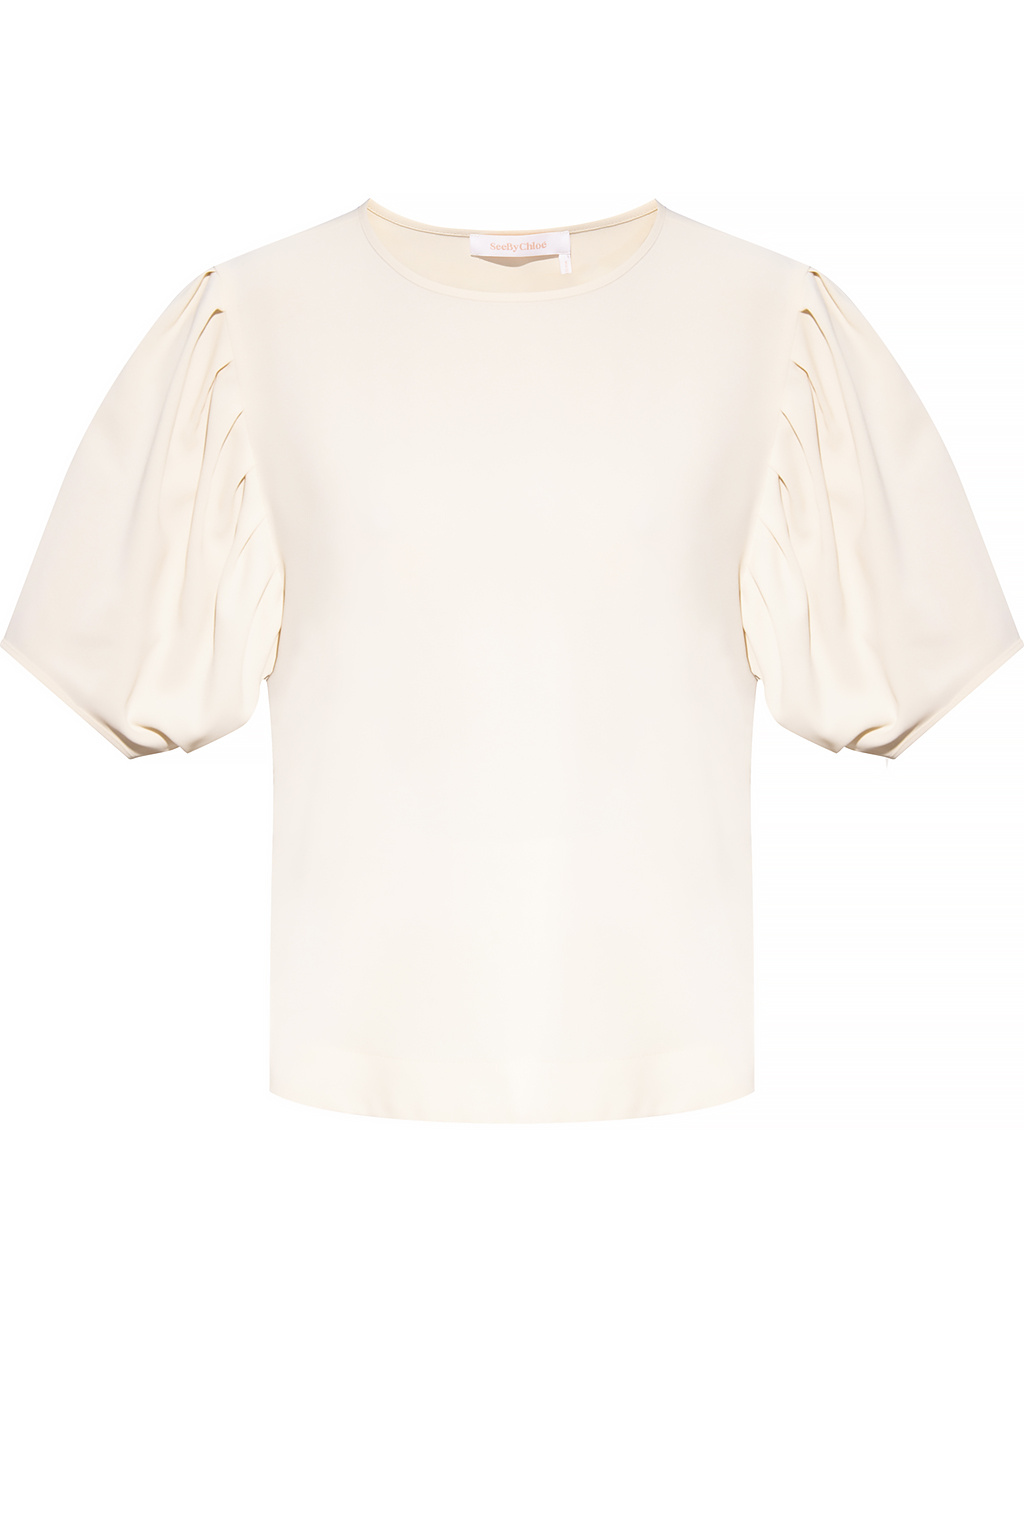 See By Chloé Round neck top